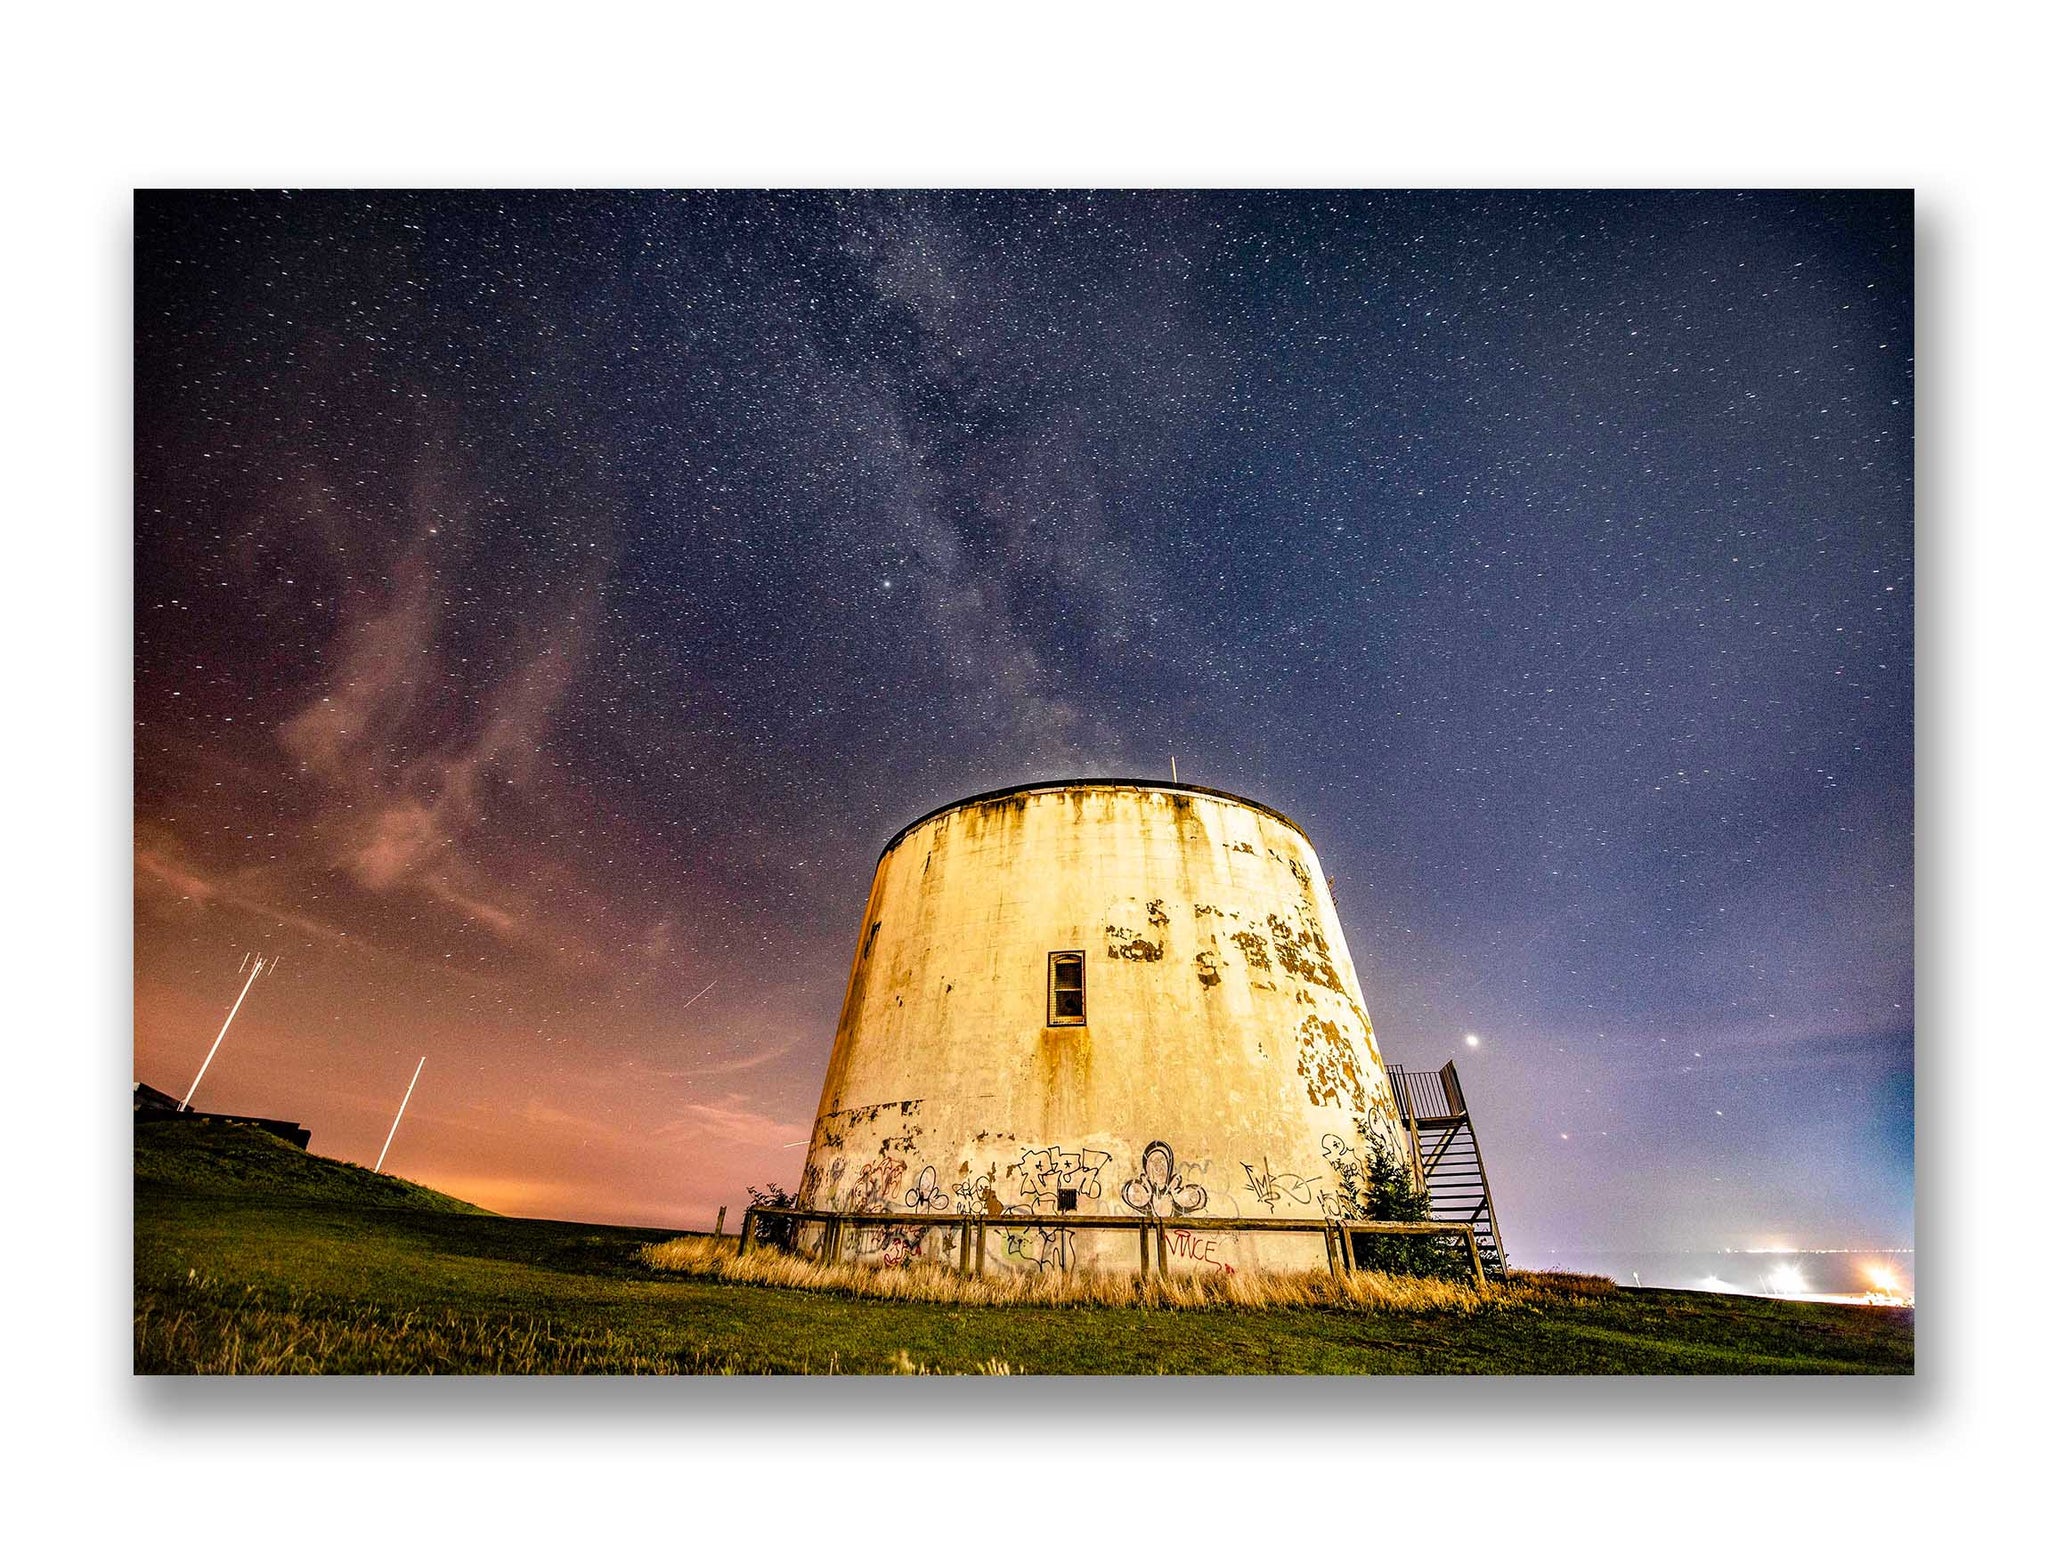 The Martello Tower and Milky Way